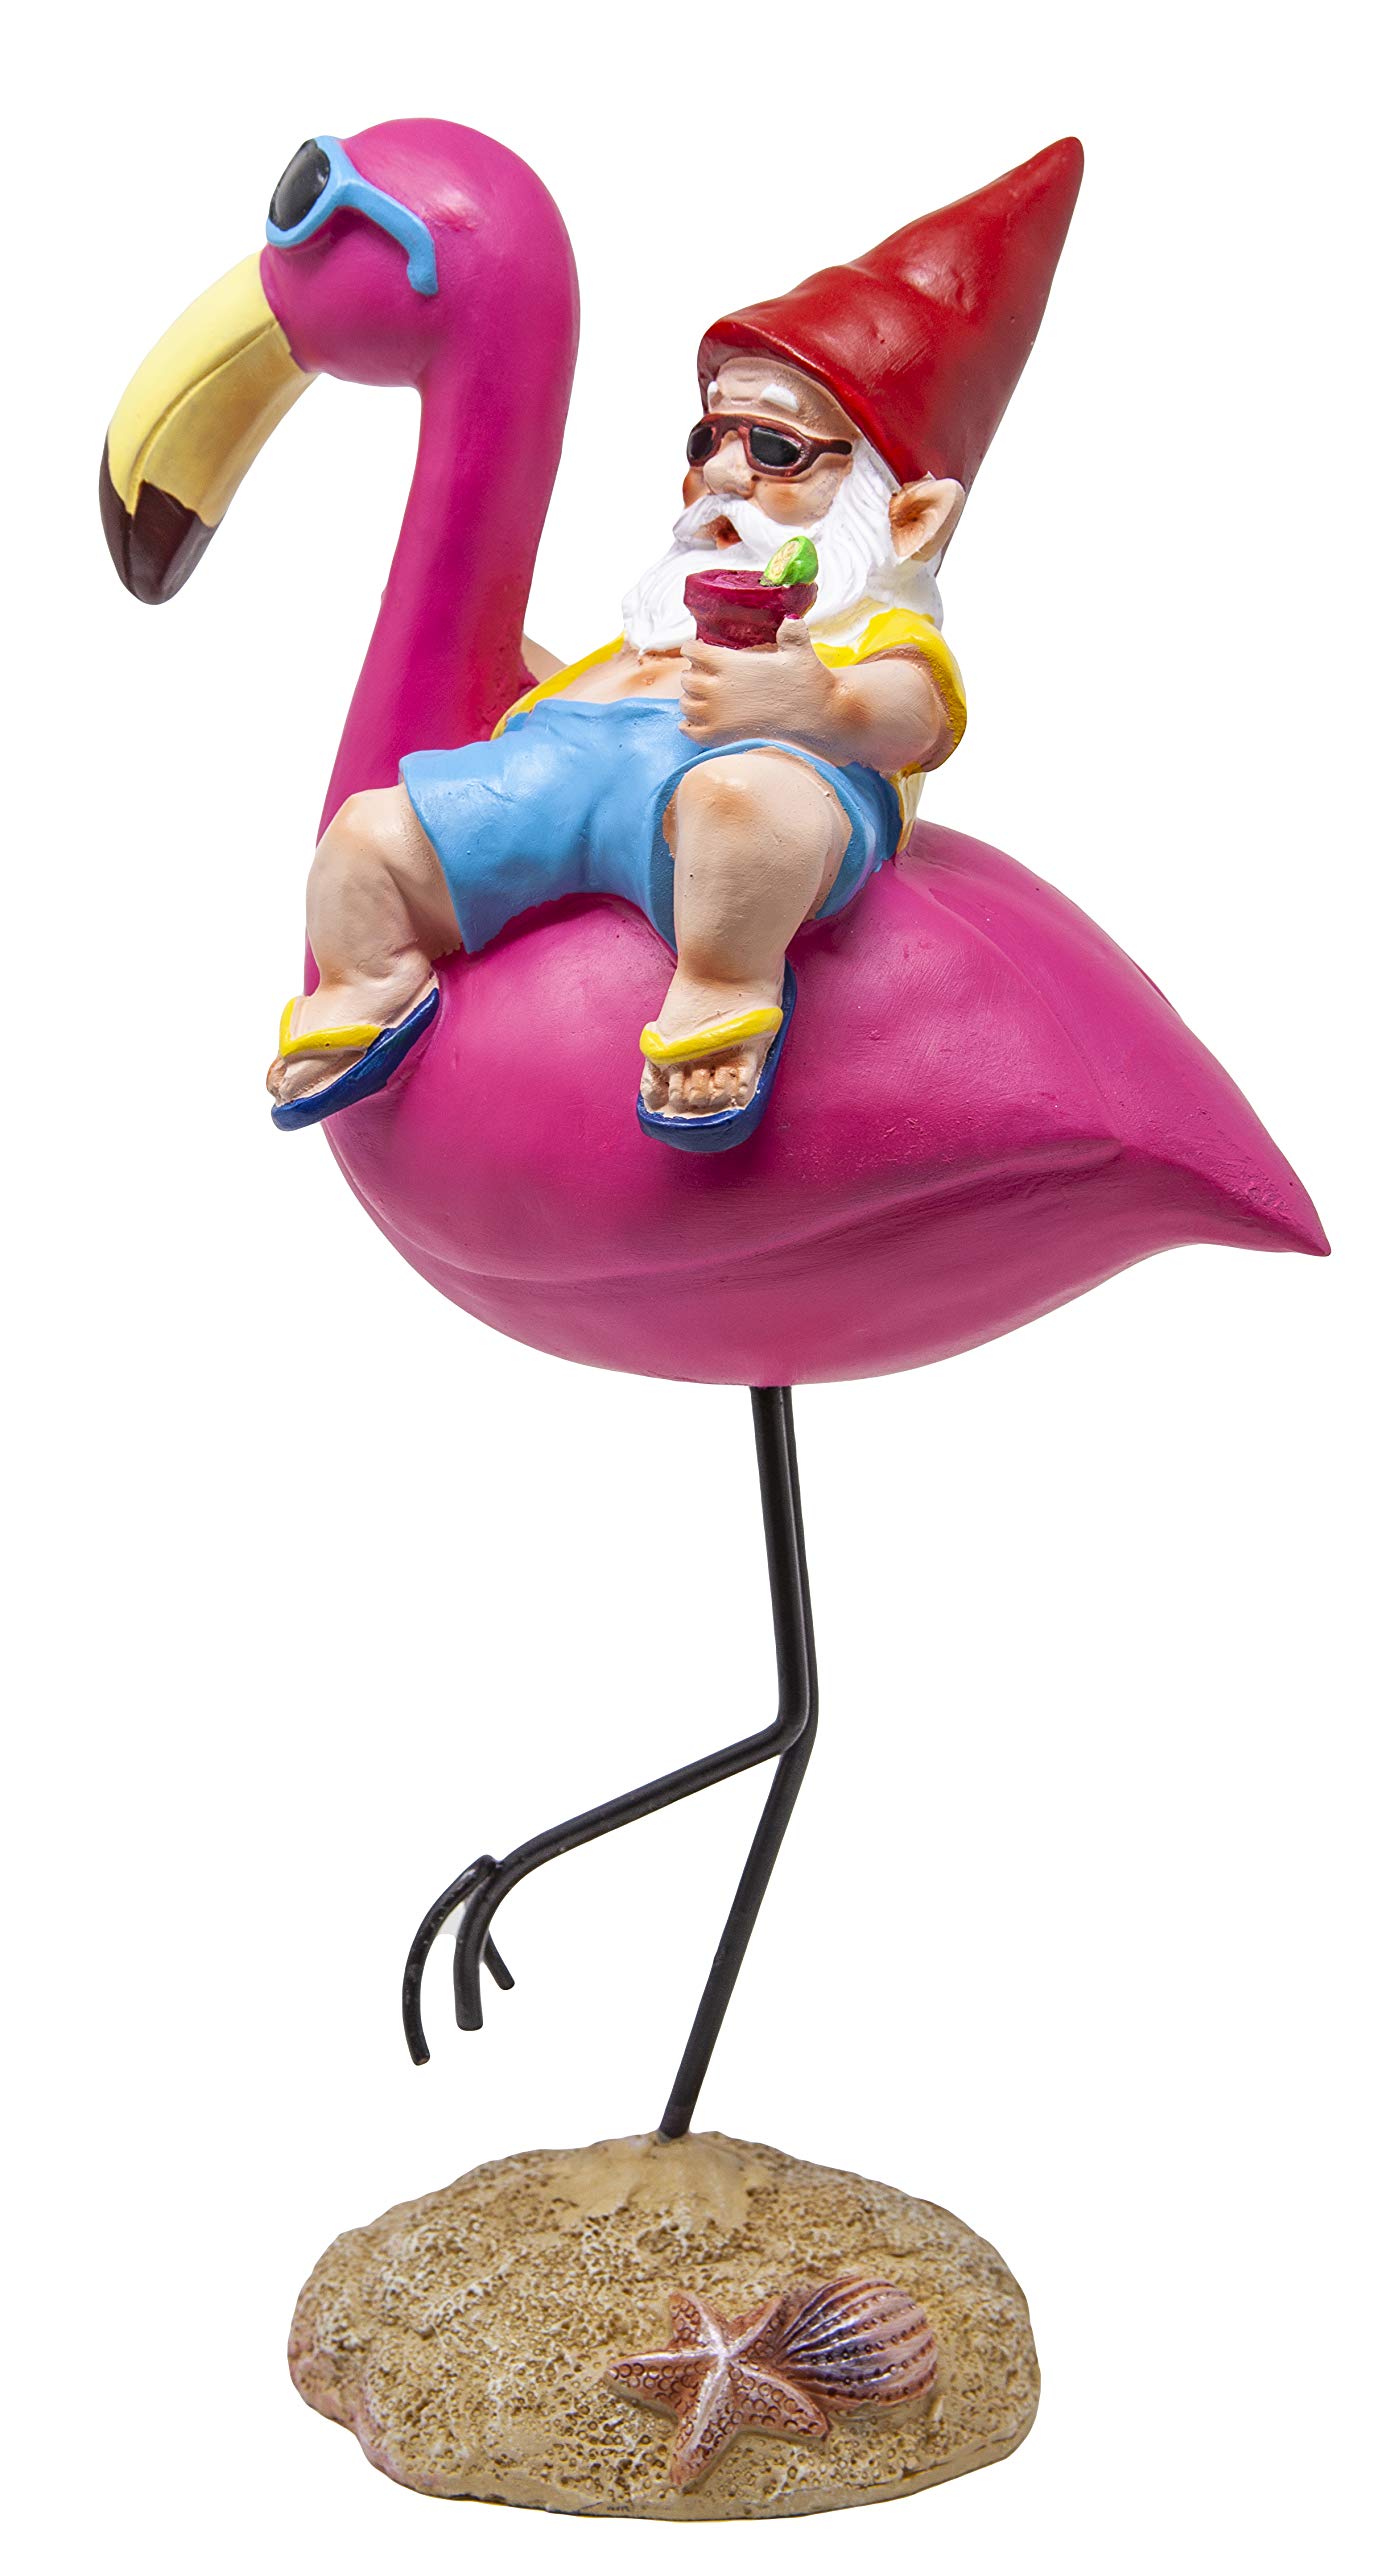 Funny Guy Mugs Garden Gnome Statue - Gnome and A Flamingo - Indoor/Outdoor Garden Gnome Sculpture for Patio, Yard or Lawn